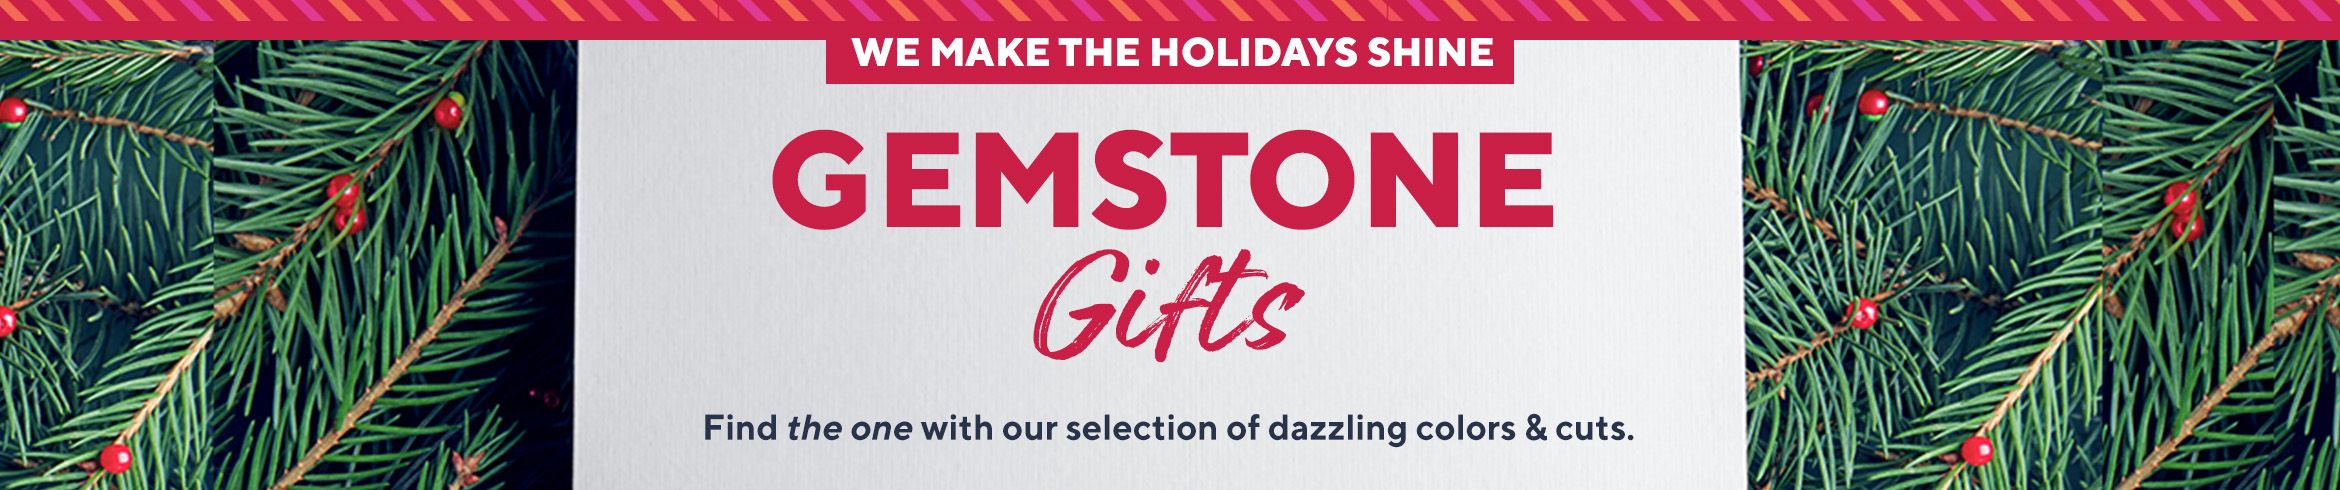 We Make The Holidays Shine  Gemstone Gifts  Find the one with our selection of dazzling colors & cuts.